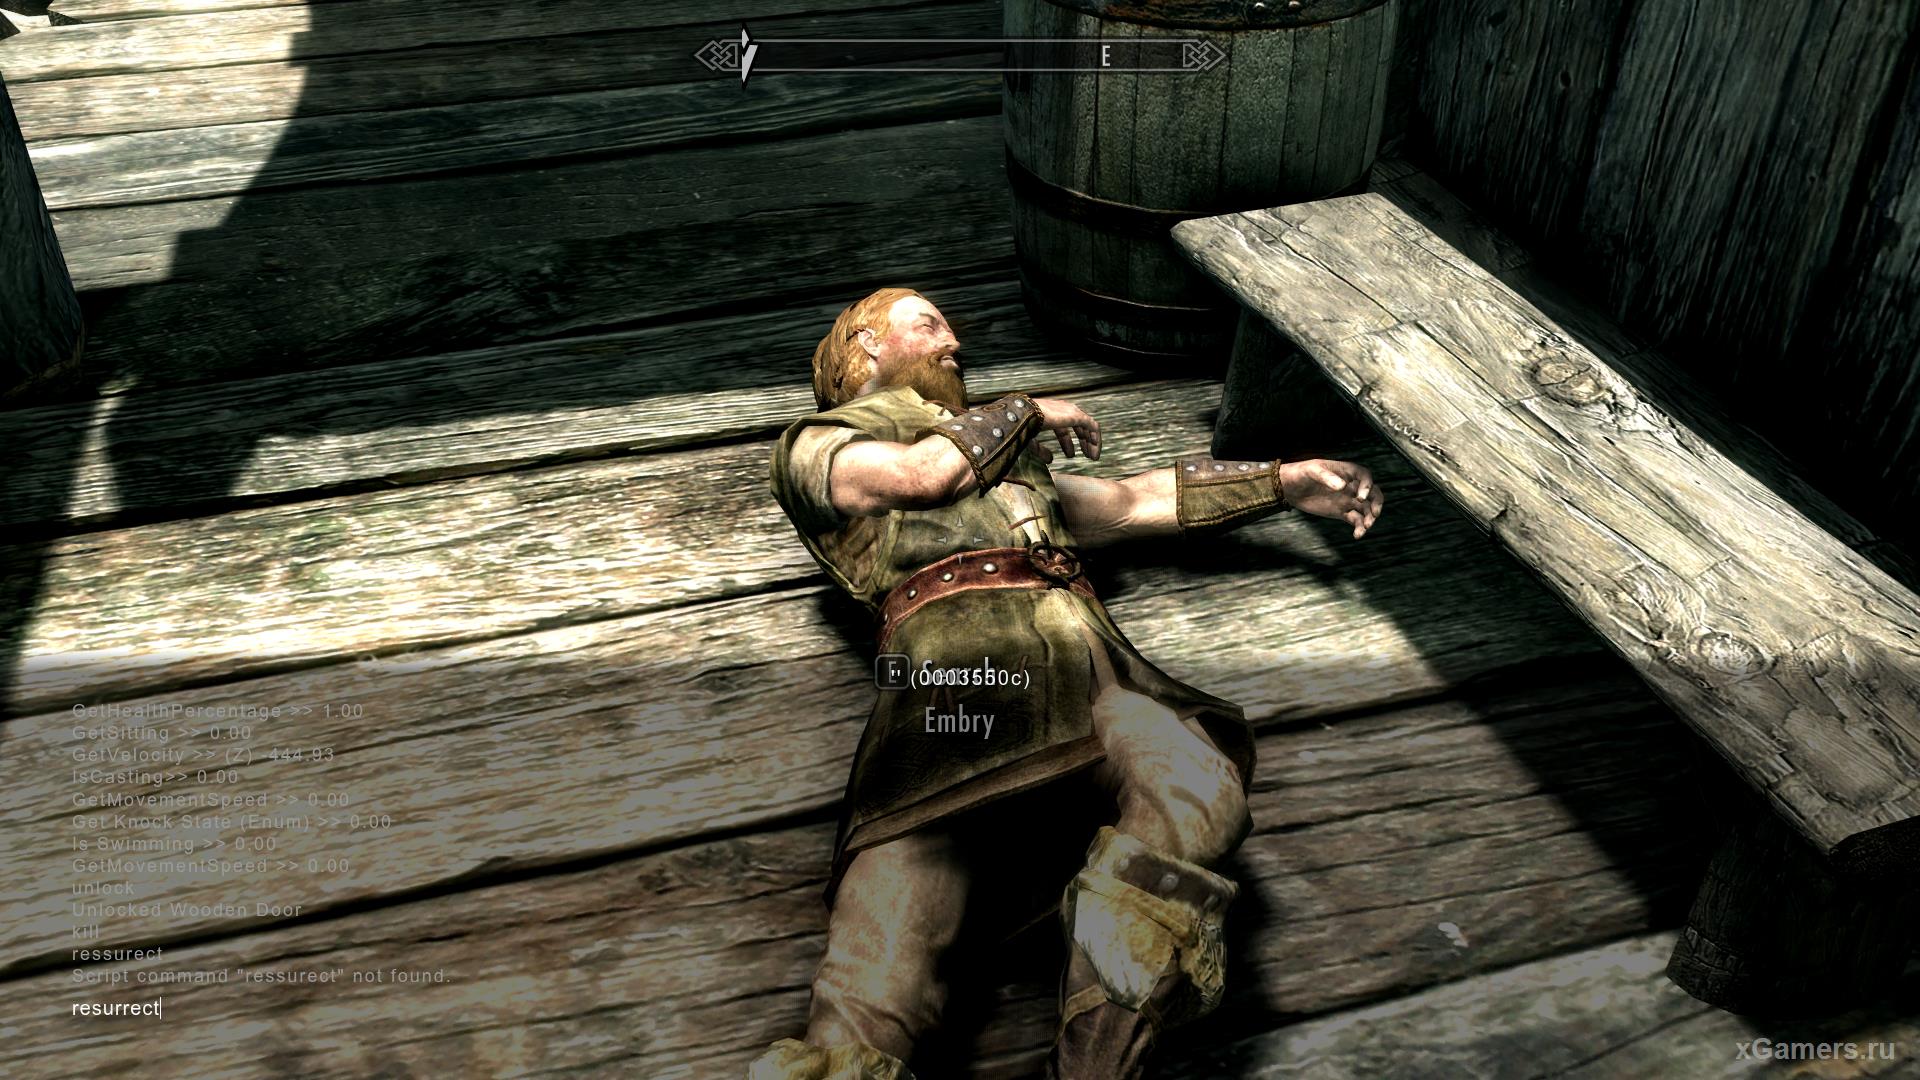 The result of canceling the Kill cheat entry in the game Skyrim